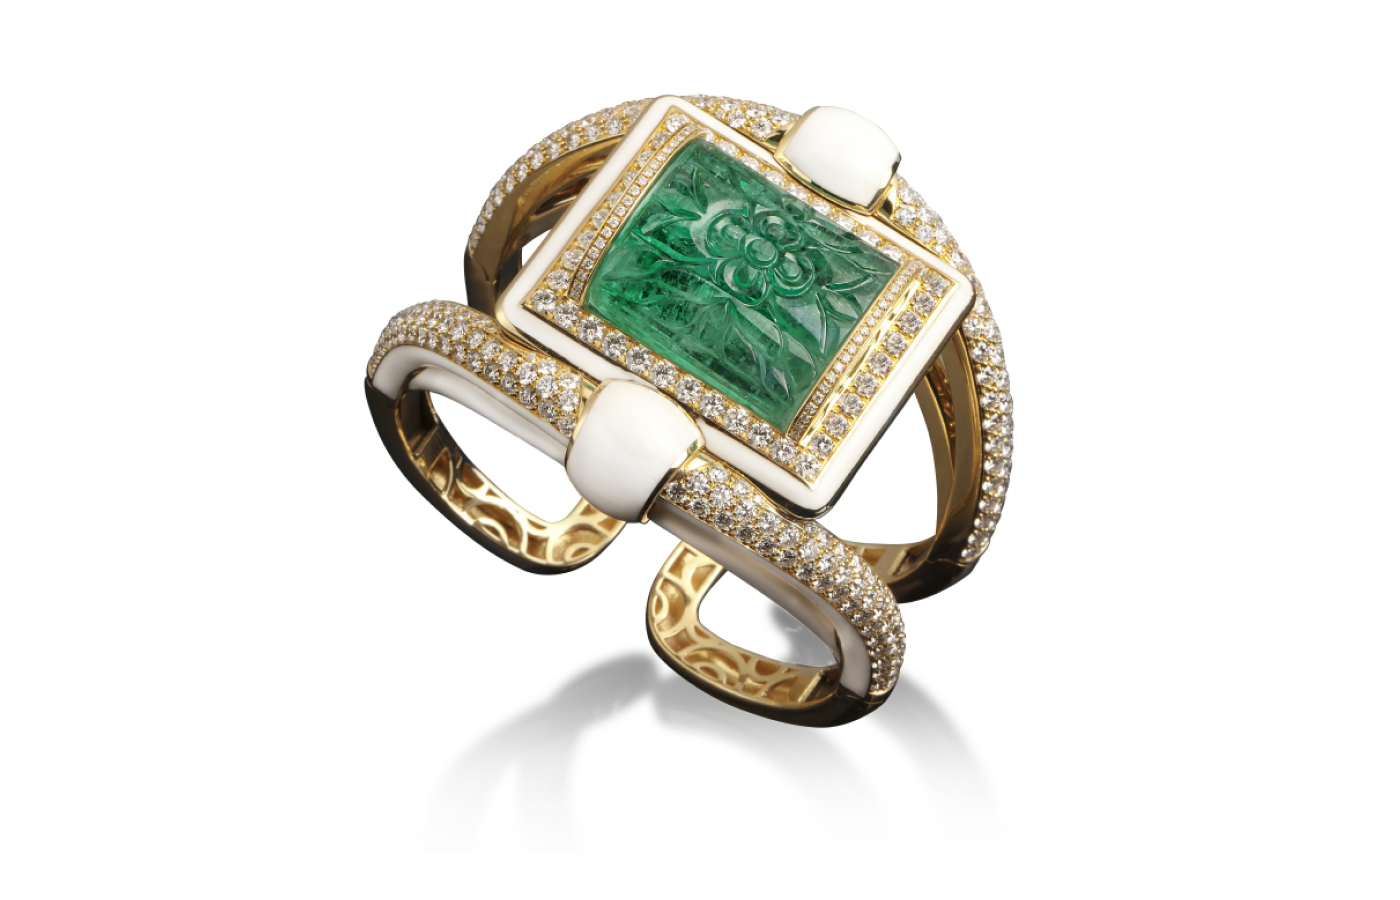 Veschetti cuff bracelet with a large carved emerald, diamonds and white enamel in 18k yellow gold